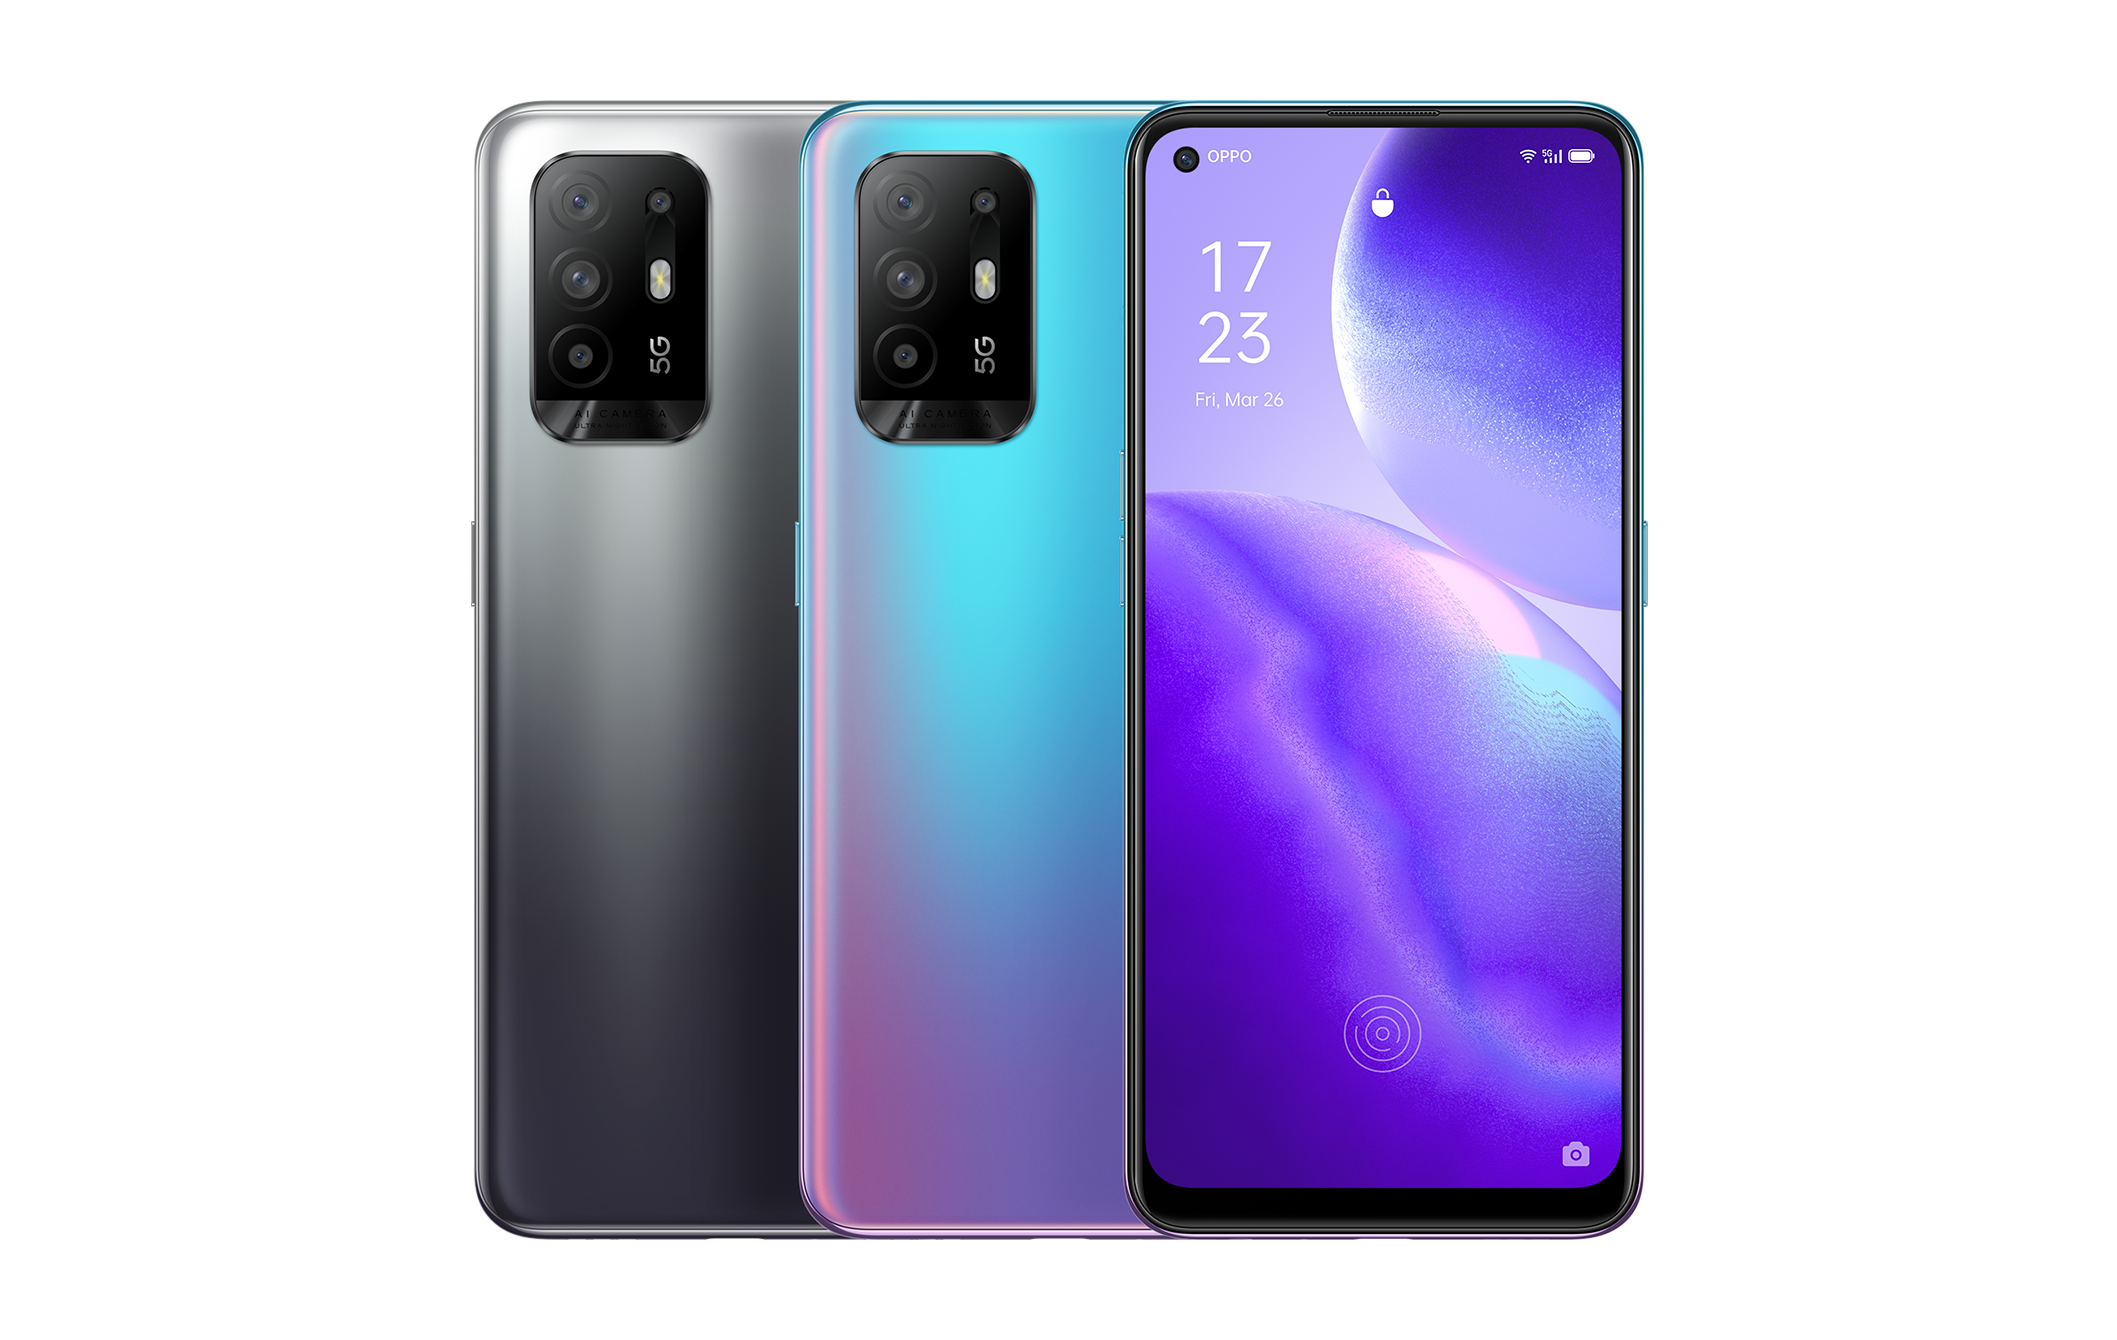 OPPO Reno5 Z launched with Dimensity 800U, 48MP quad cameras, and 